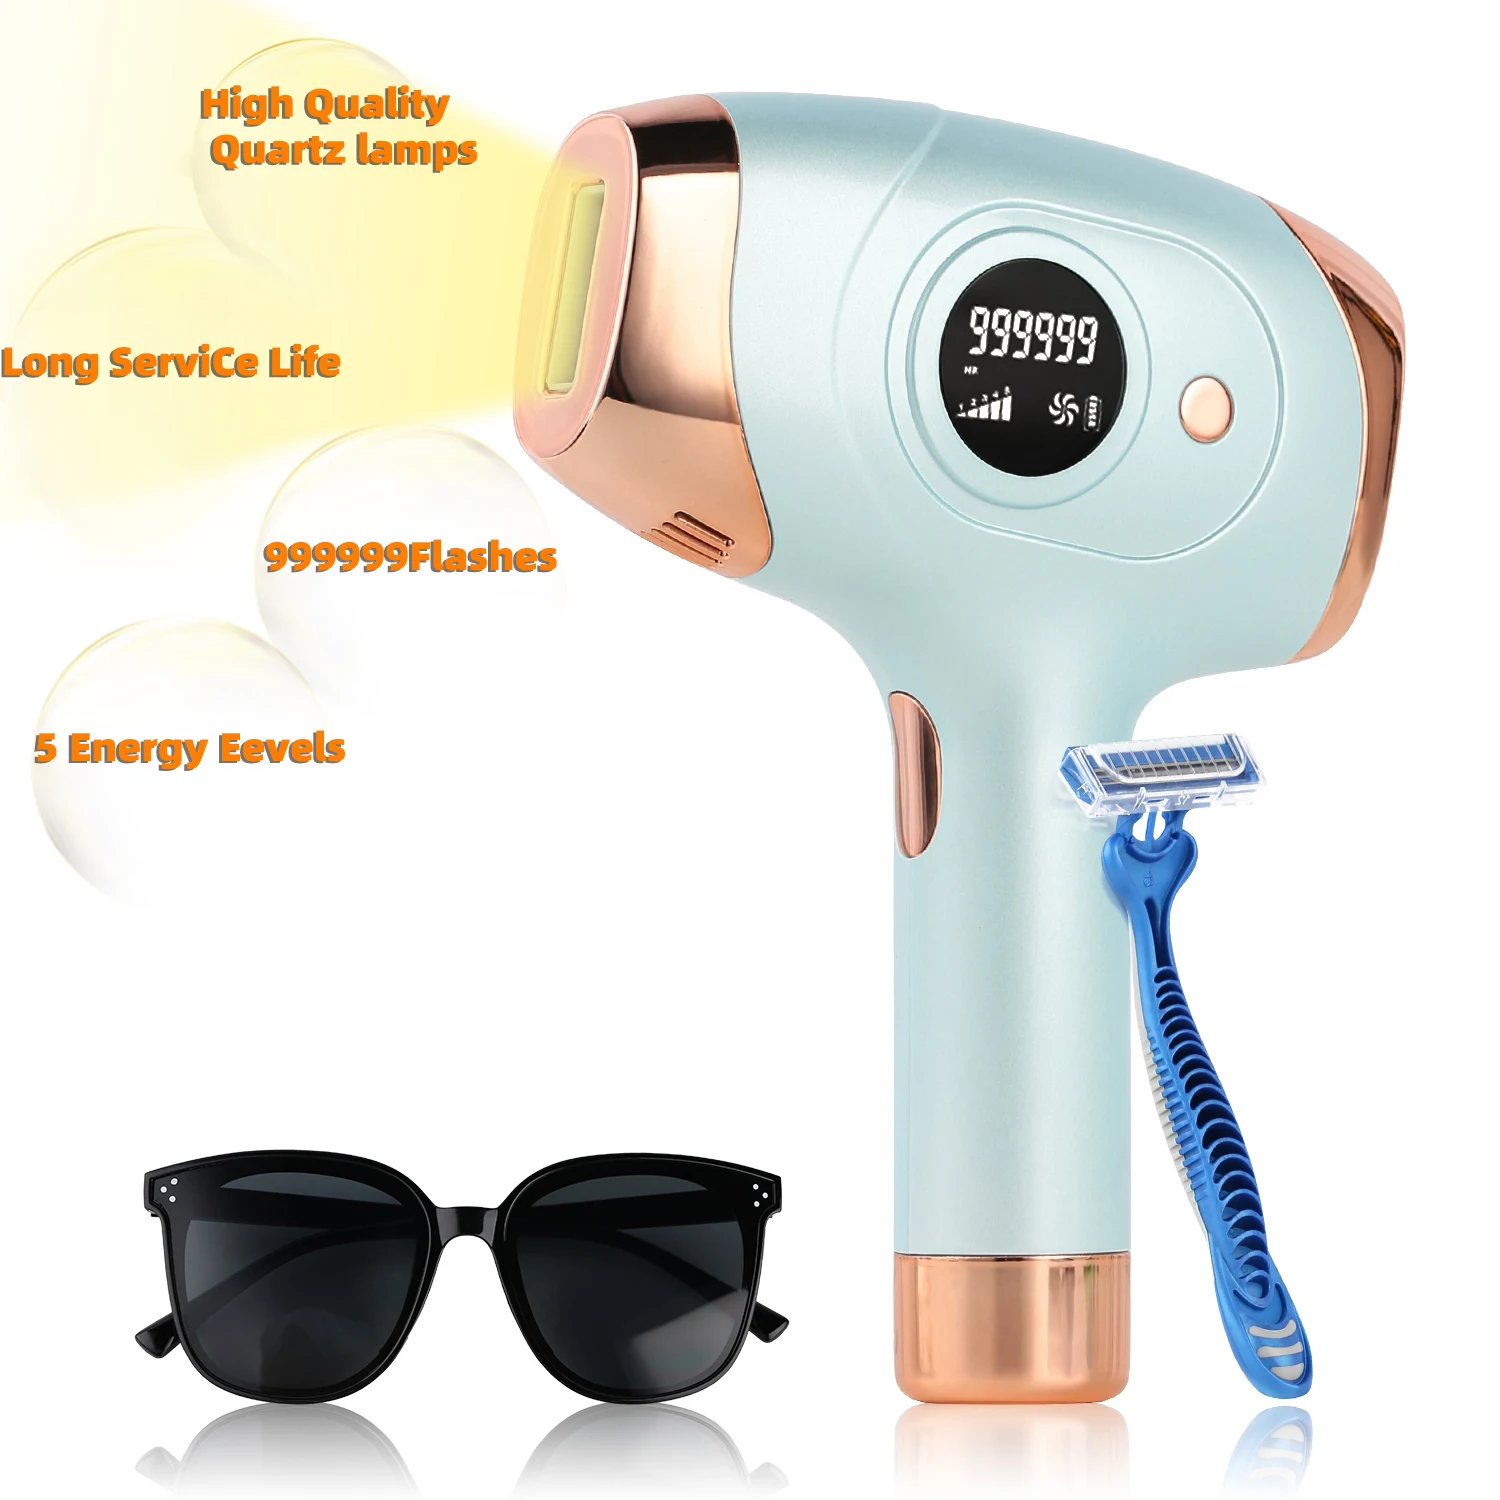 

2021 New Arrivals Home Use Ipl Machine 999999 Flashes Painless Permanent Laser Epilator Ipl Hair Removal, White